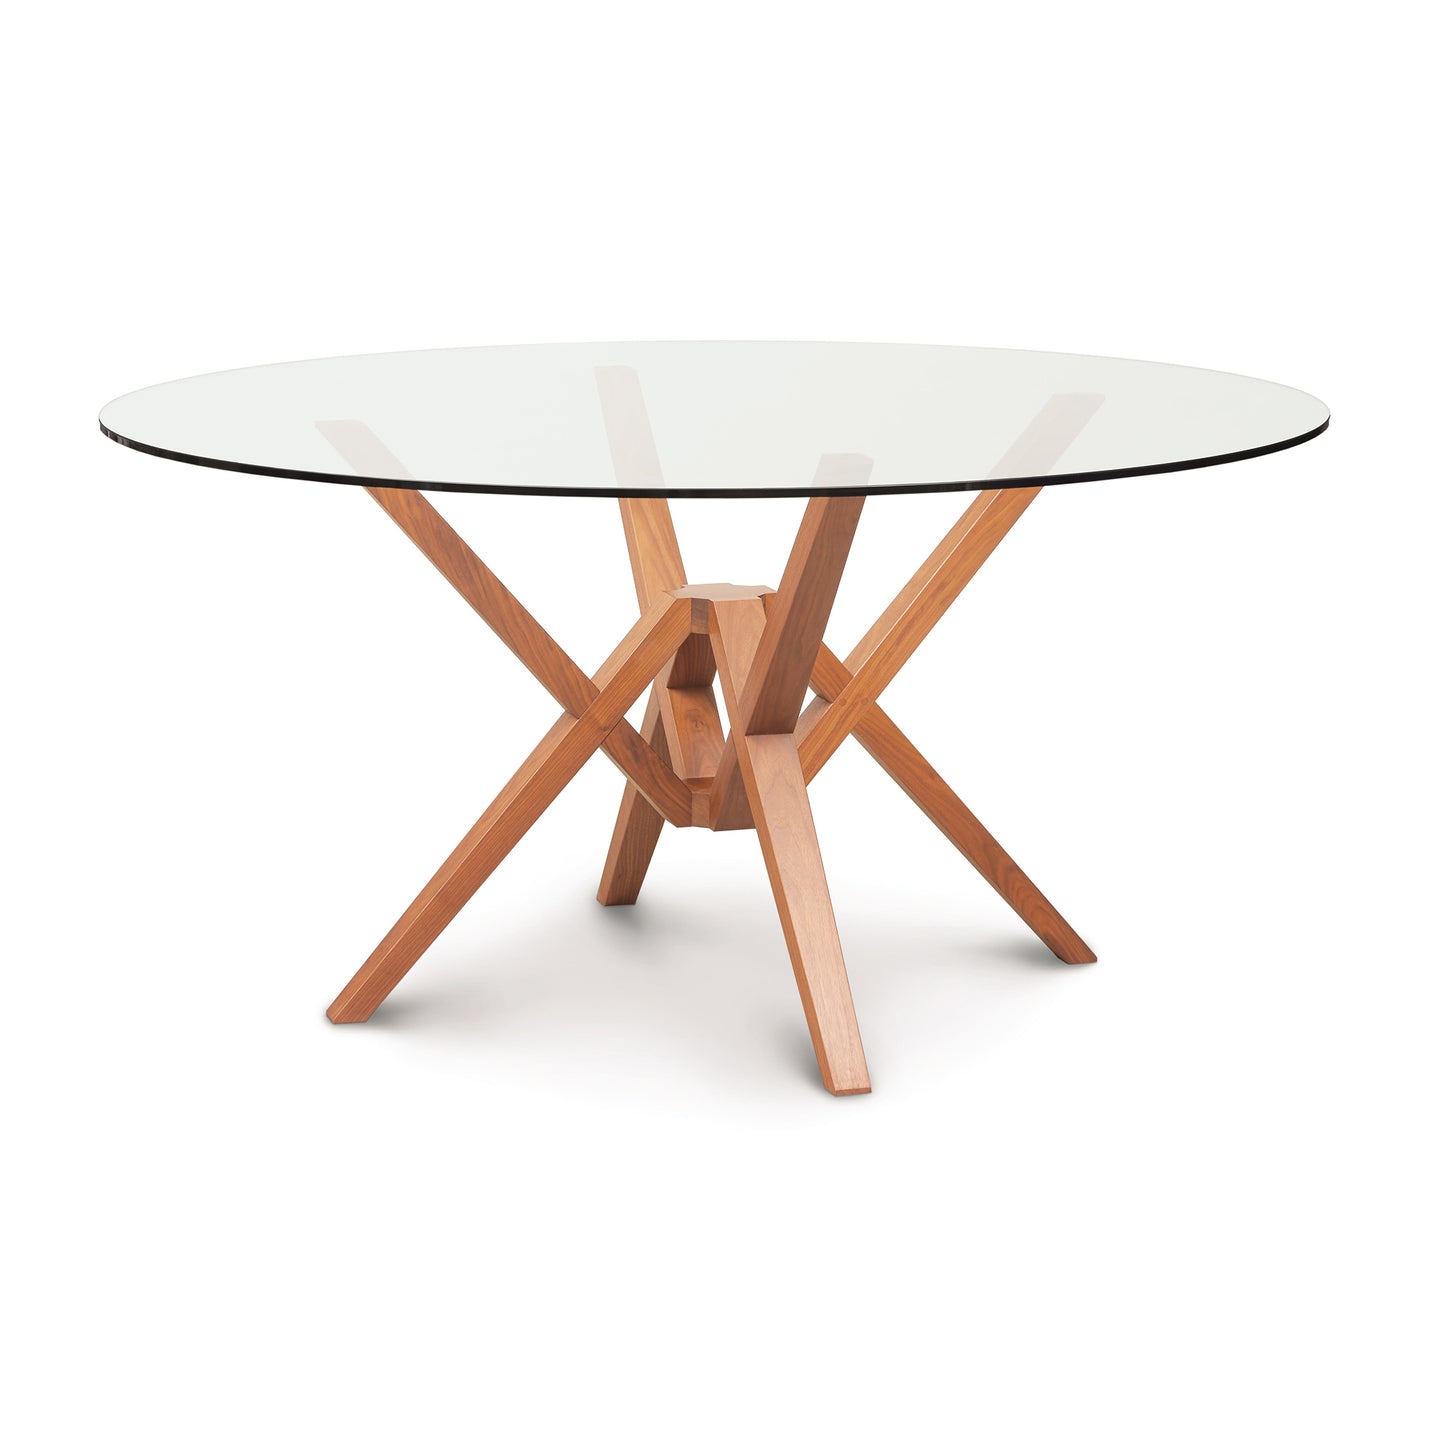 A round dining table with wooden legs and a glass top.